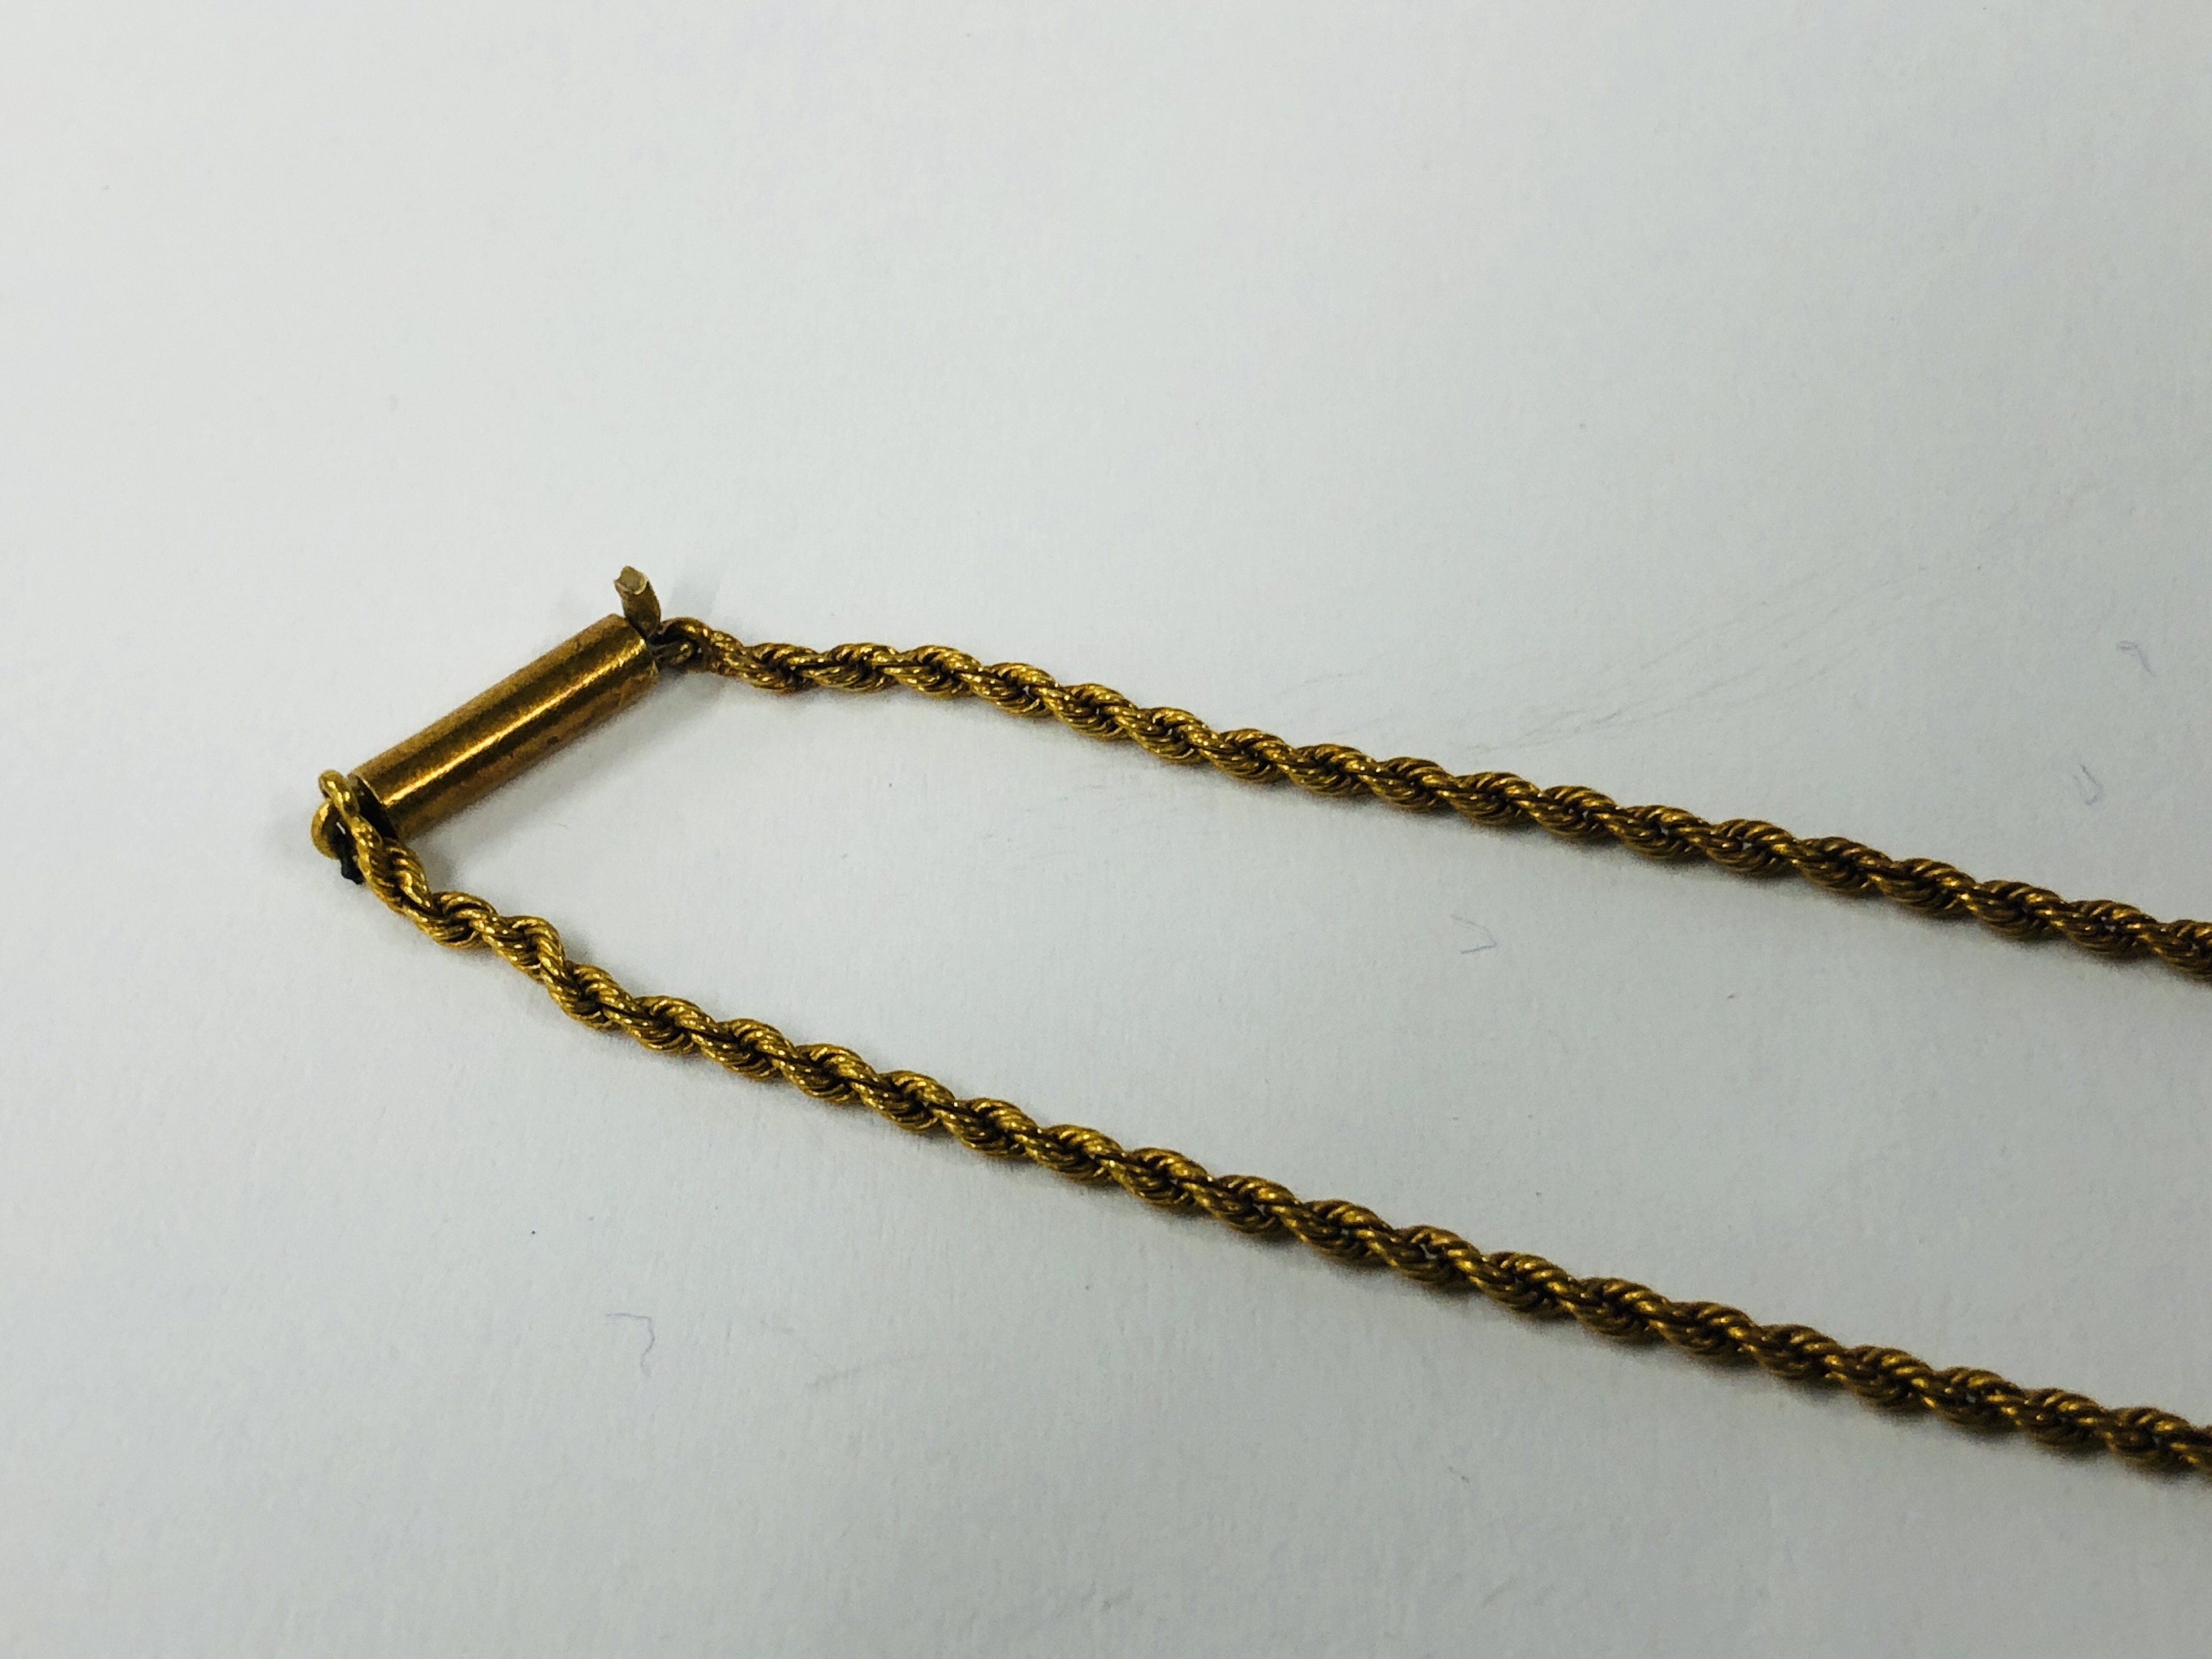 AN ANTIQUE CHILD'S YELLOW METAL ROPE DESIGN NECKLACE SET WITH SEED PEARLS, LENGTH 31CM. - Image 8 of 9